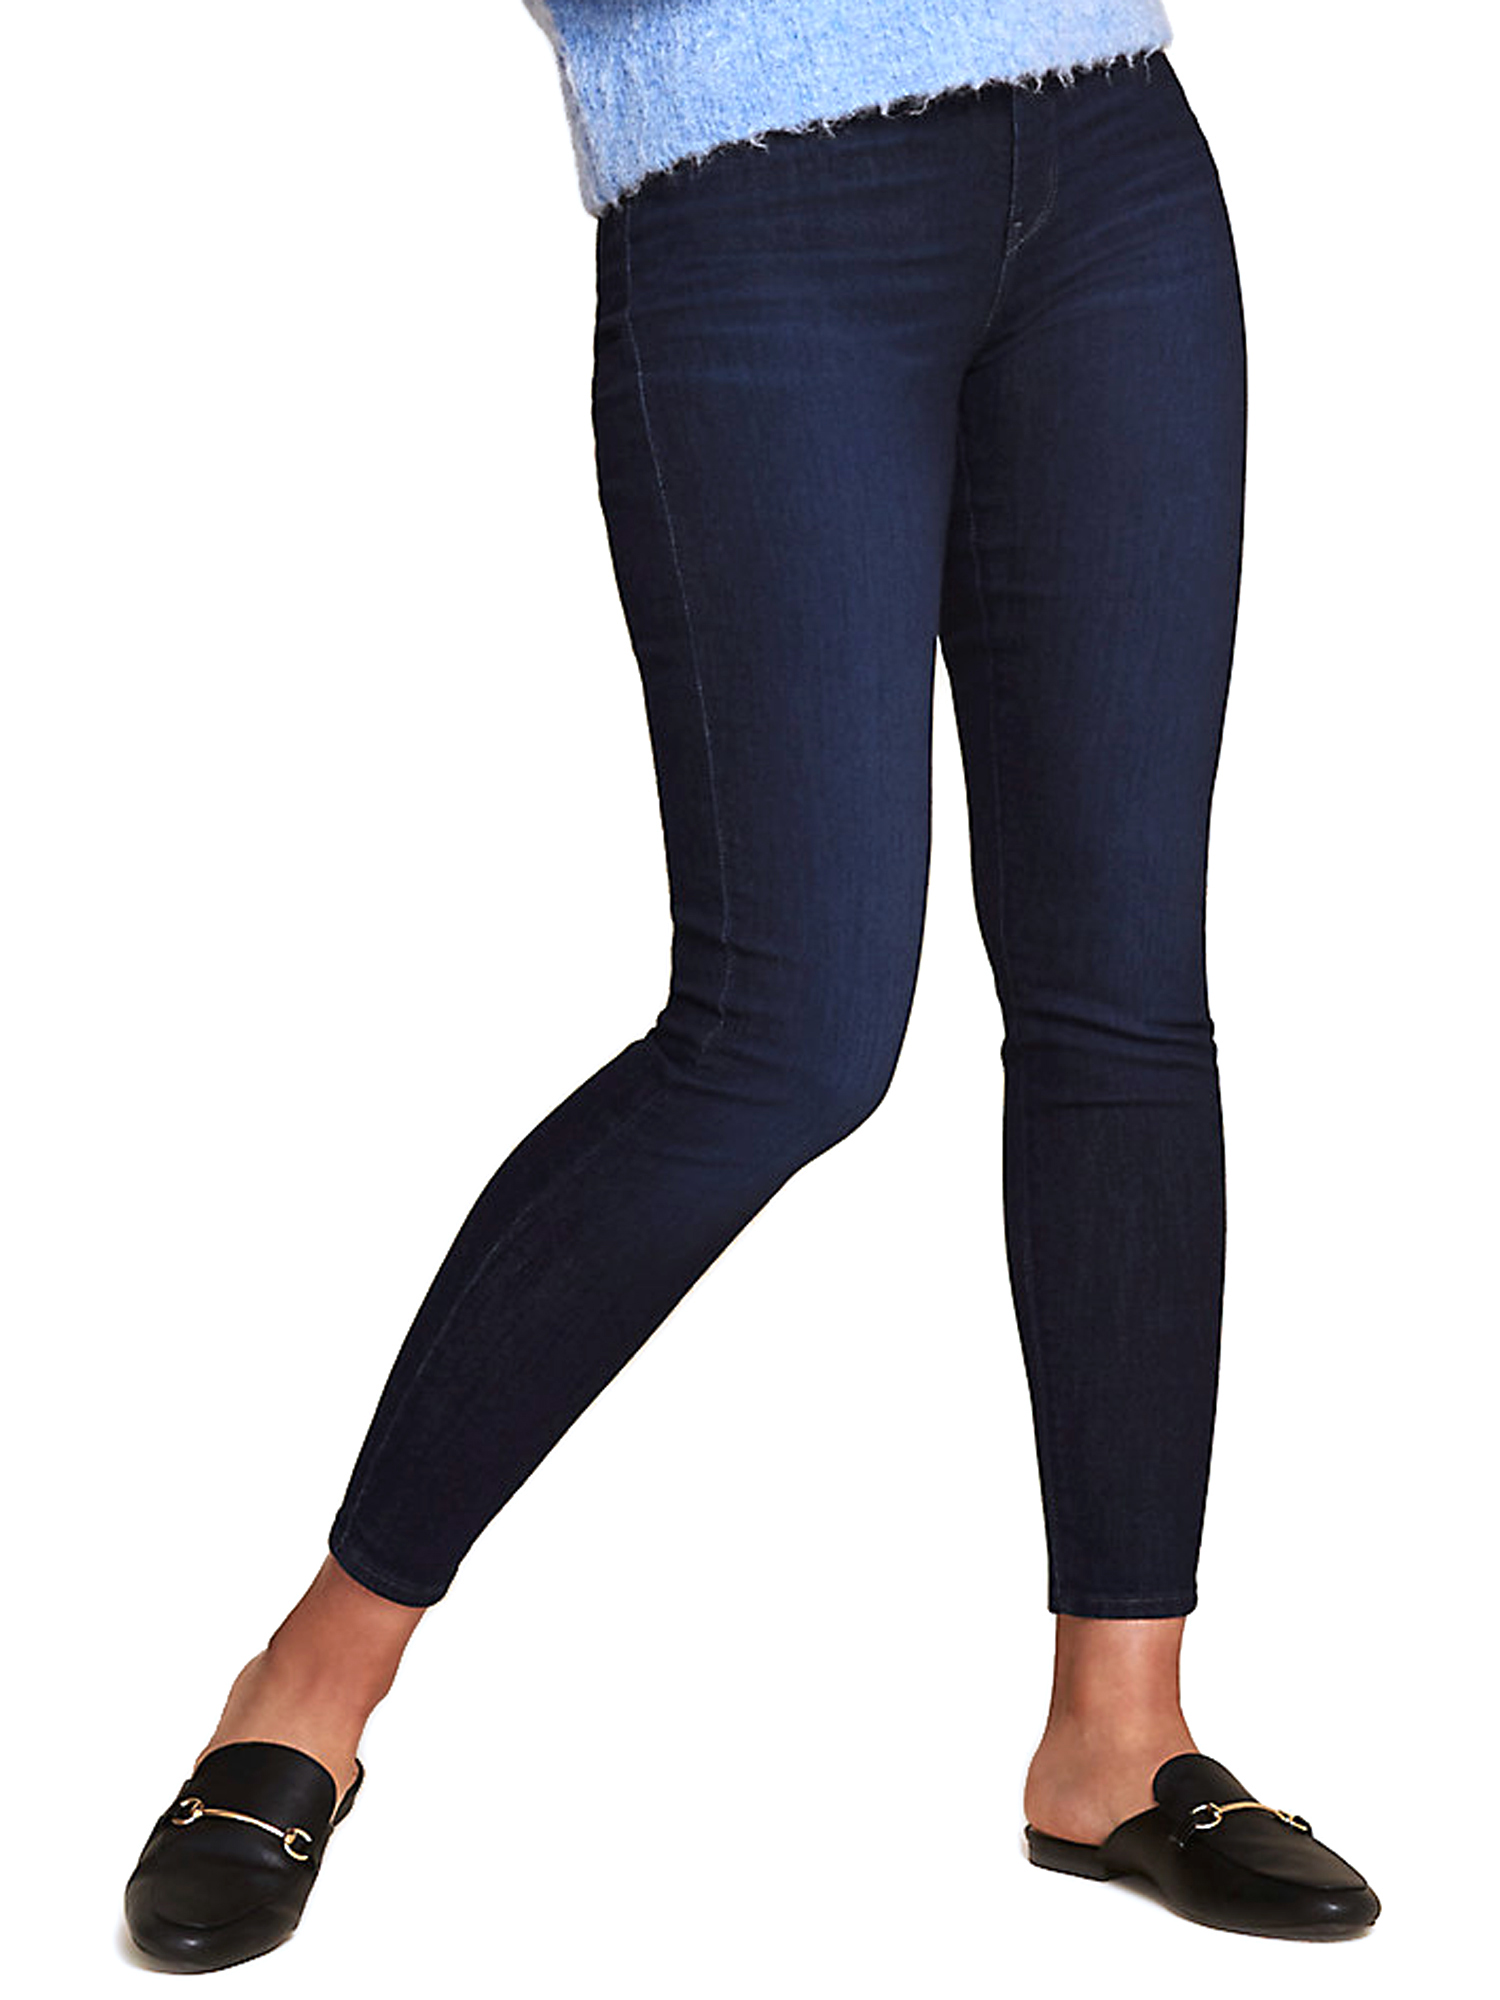 Signature by Levi Strauss & Co. Women's and Women's Plus Mid Rise Skinny Jeans - image 1 of 6